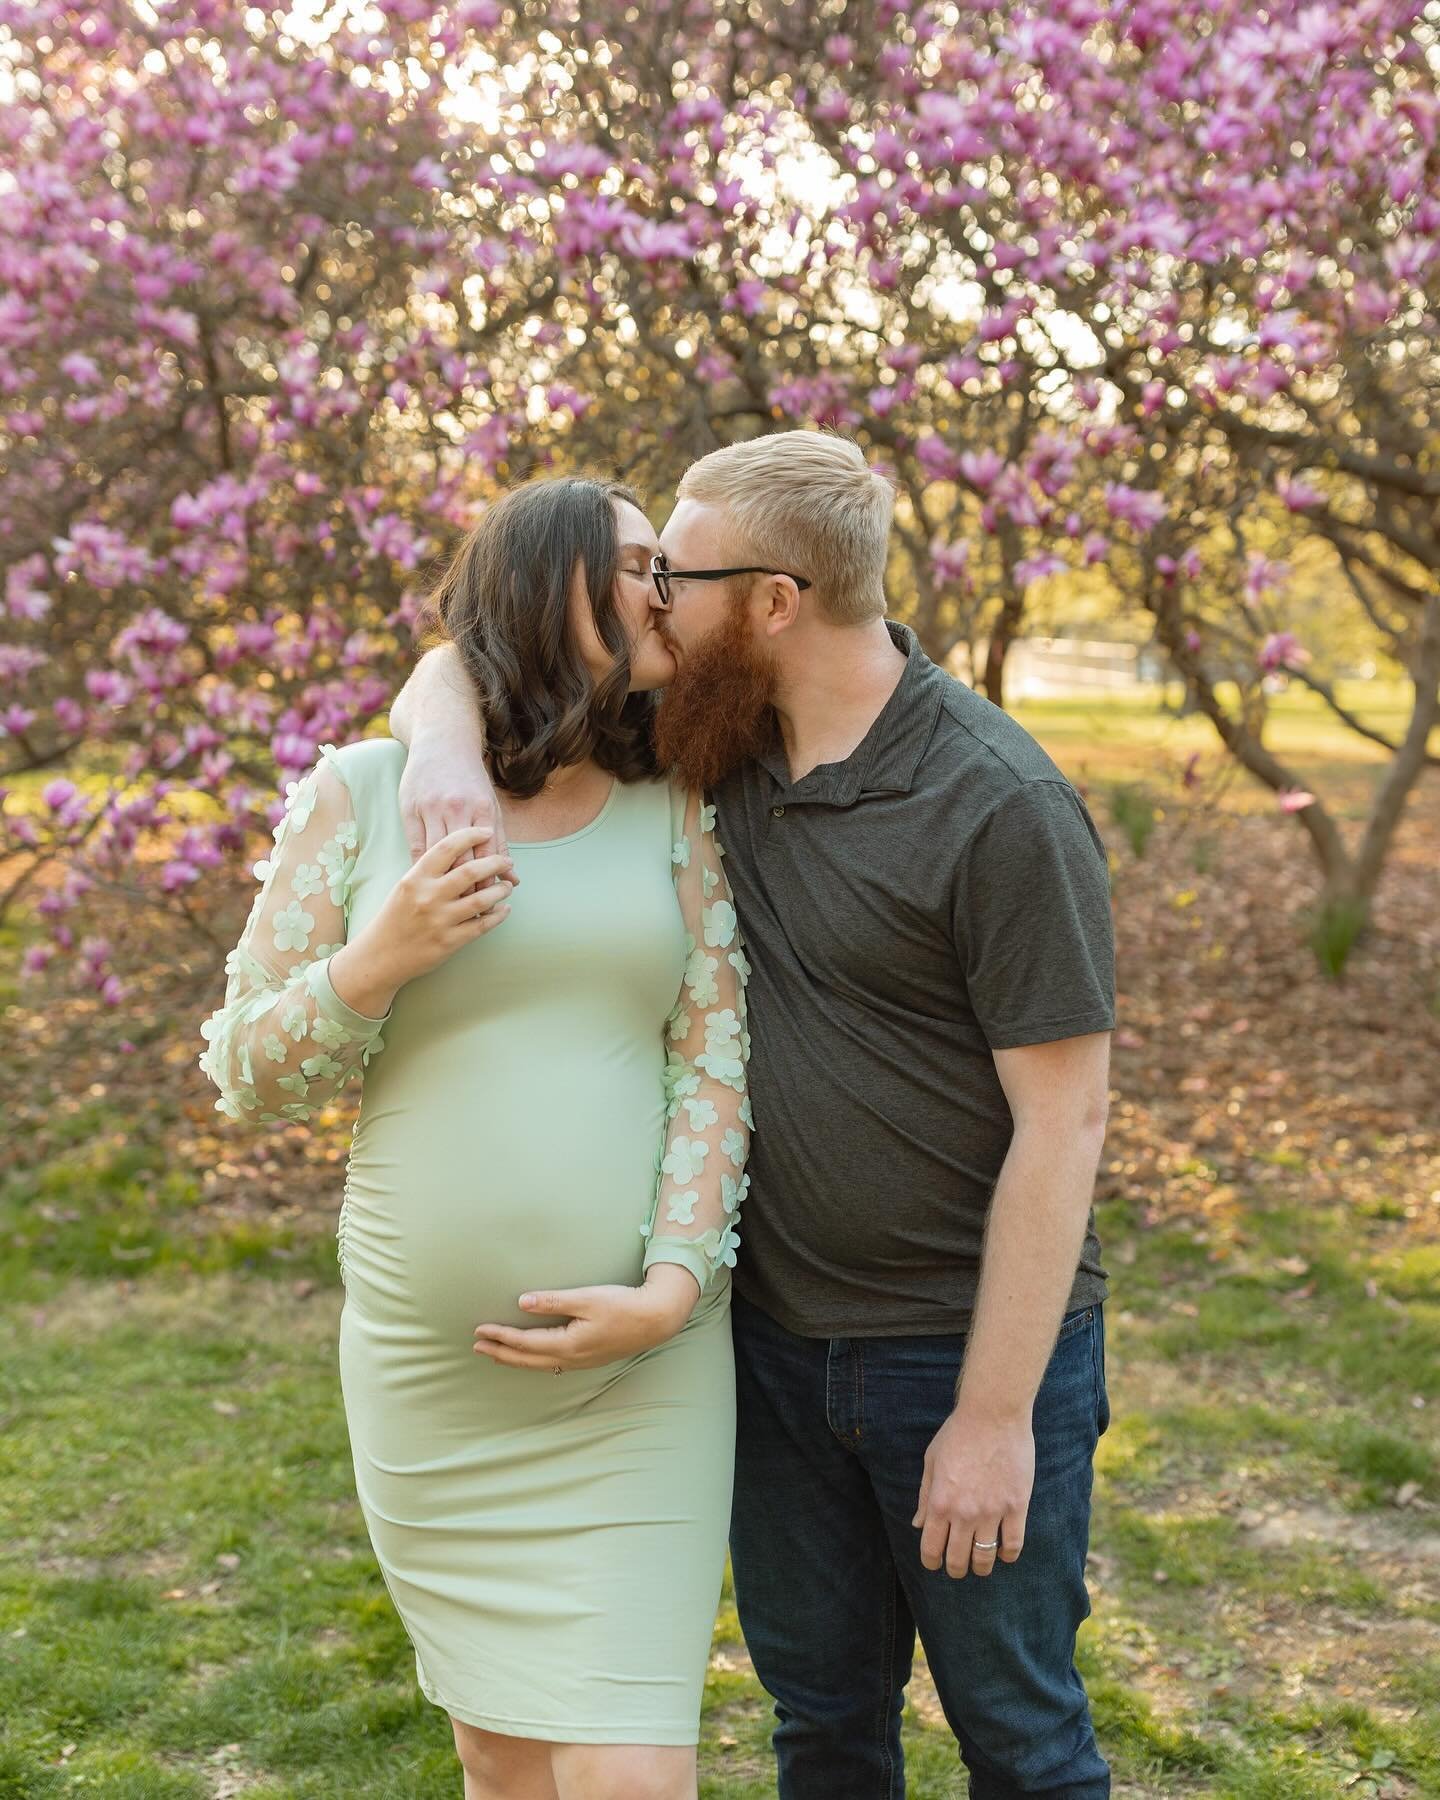 So thankful to be capturing more family sessions lately! My passion for documenting families has grown so much as my family has grown. Waddled around the park w this mama and our big bellies and had a lot of fun capturing these new parents to be!🥰